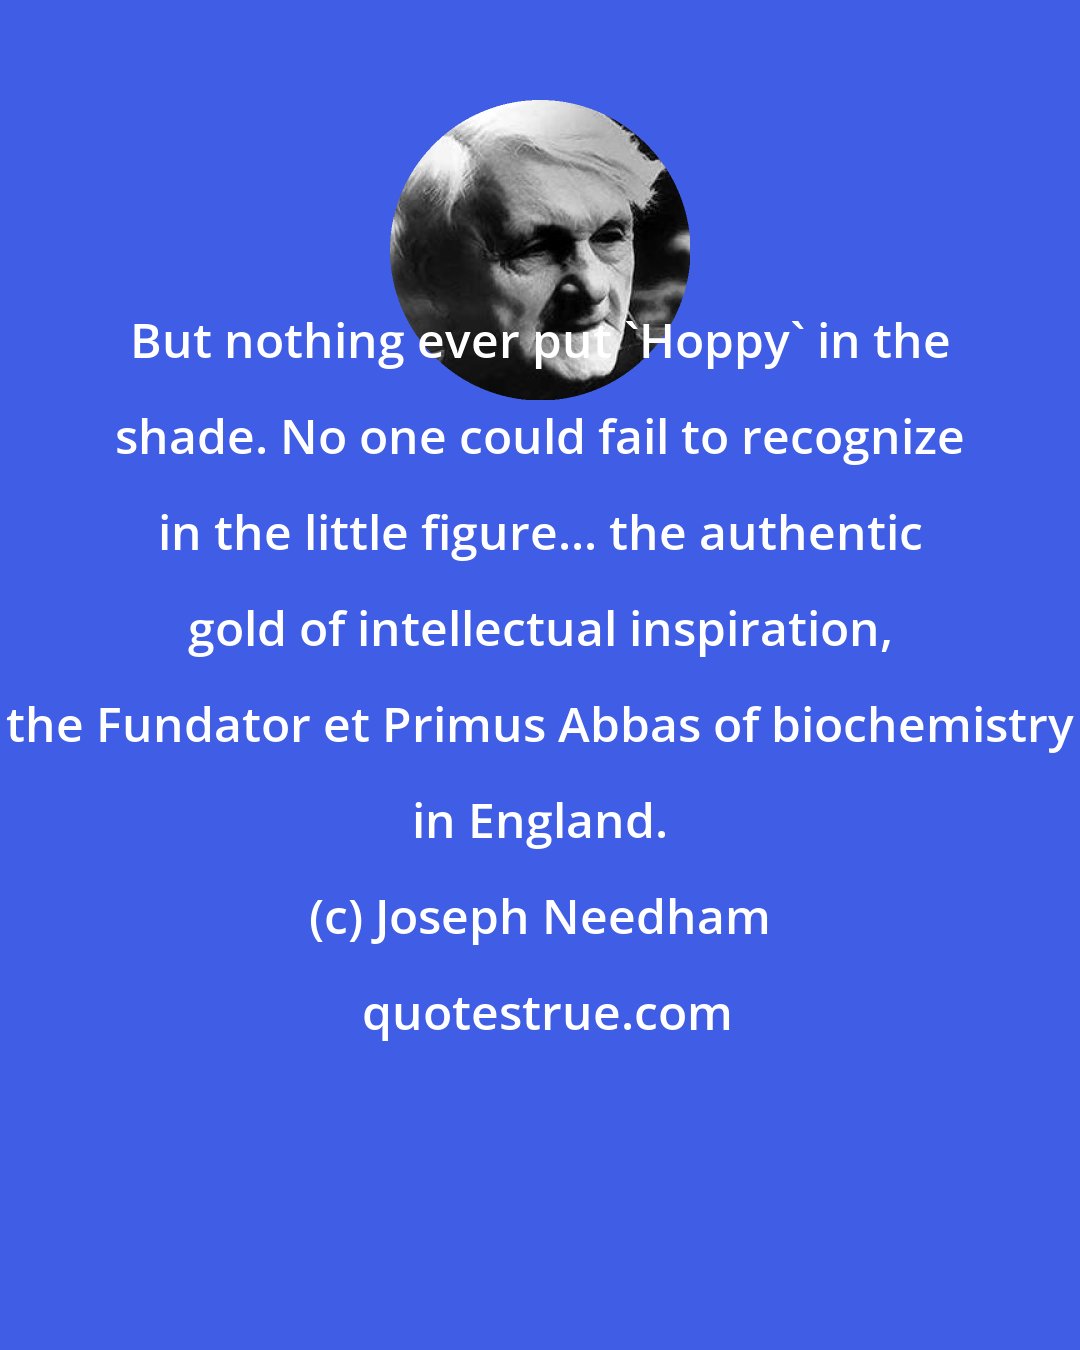 Joseph Needham: But nothing ever put 'Hoppy' in the shade. No one could fail to recognize in the little figure... the authentic gold of intellectual inspiration, the Fundator et Primus Abbas of biochemistry in England.